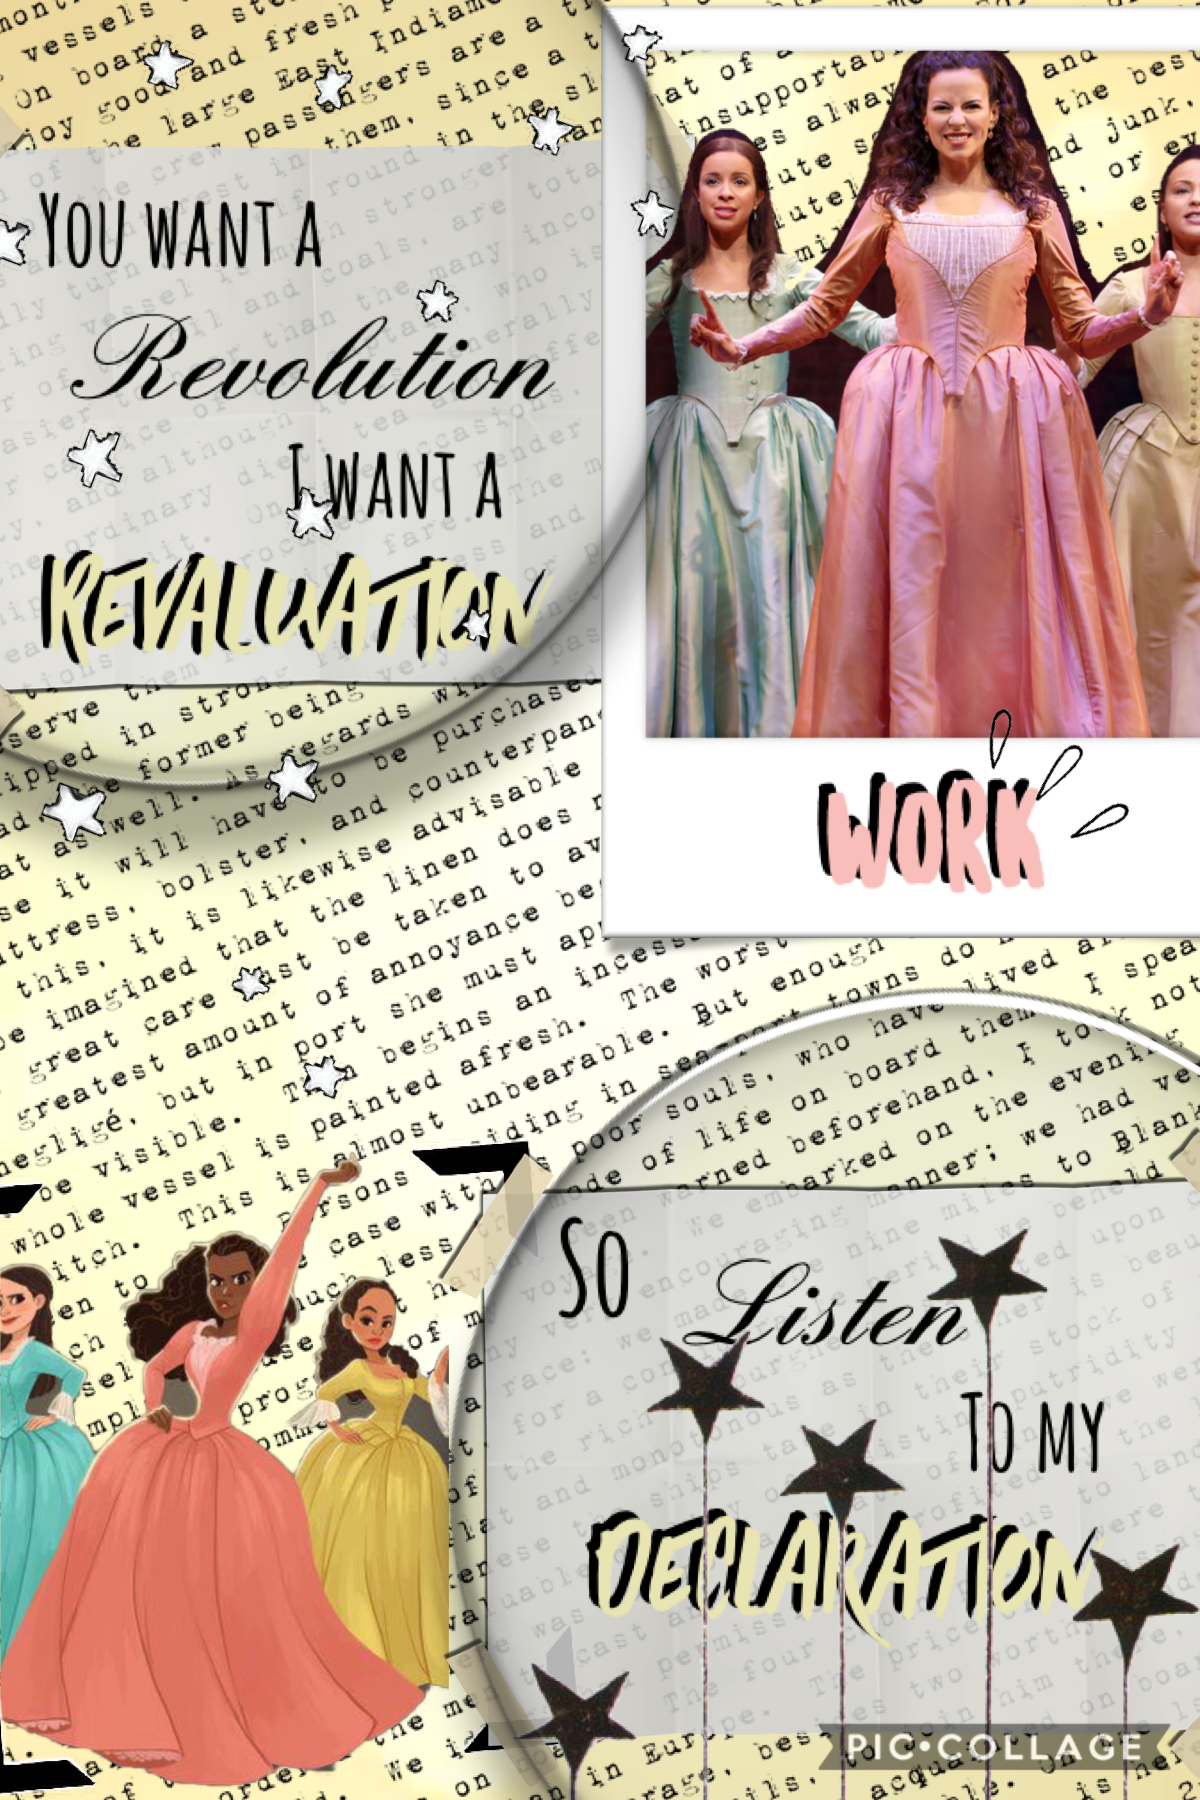 This is the collage I made for 1703hamiltons contest! Go check their acc out!
P.s sorry if I spelled your name wrong. 